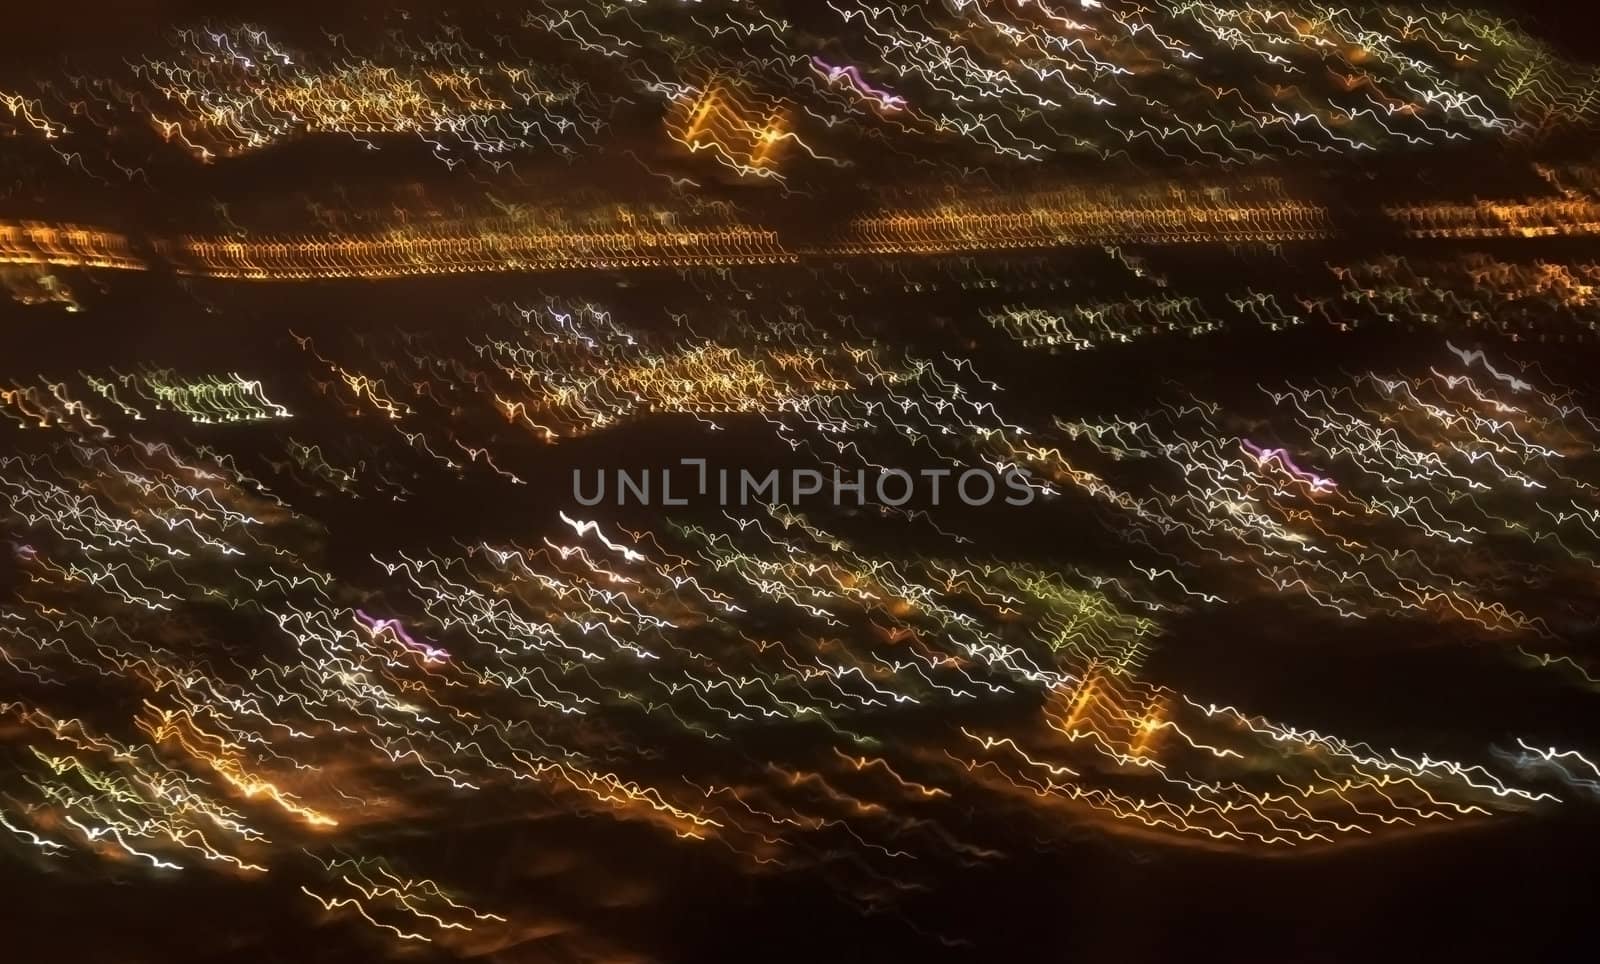 Night view of the city from an airplane taking off. Collage